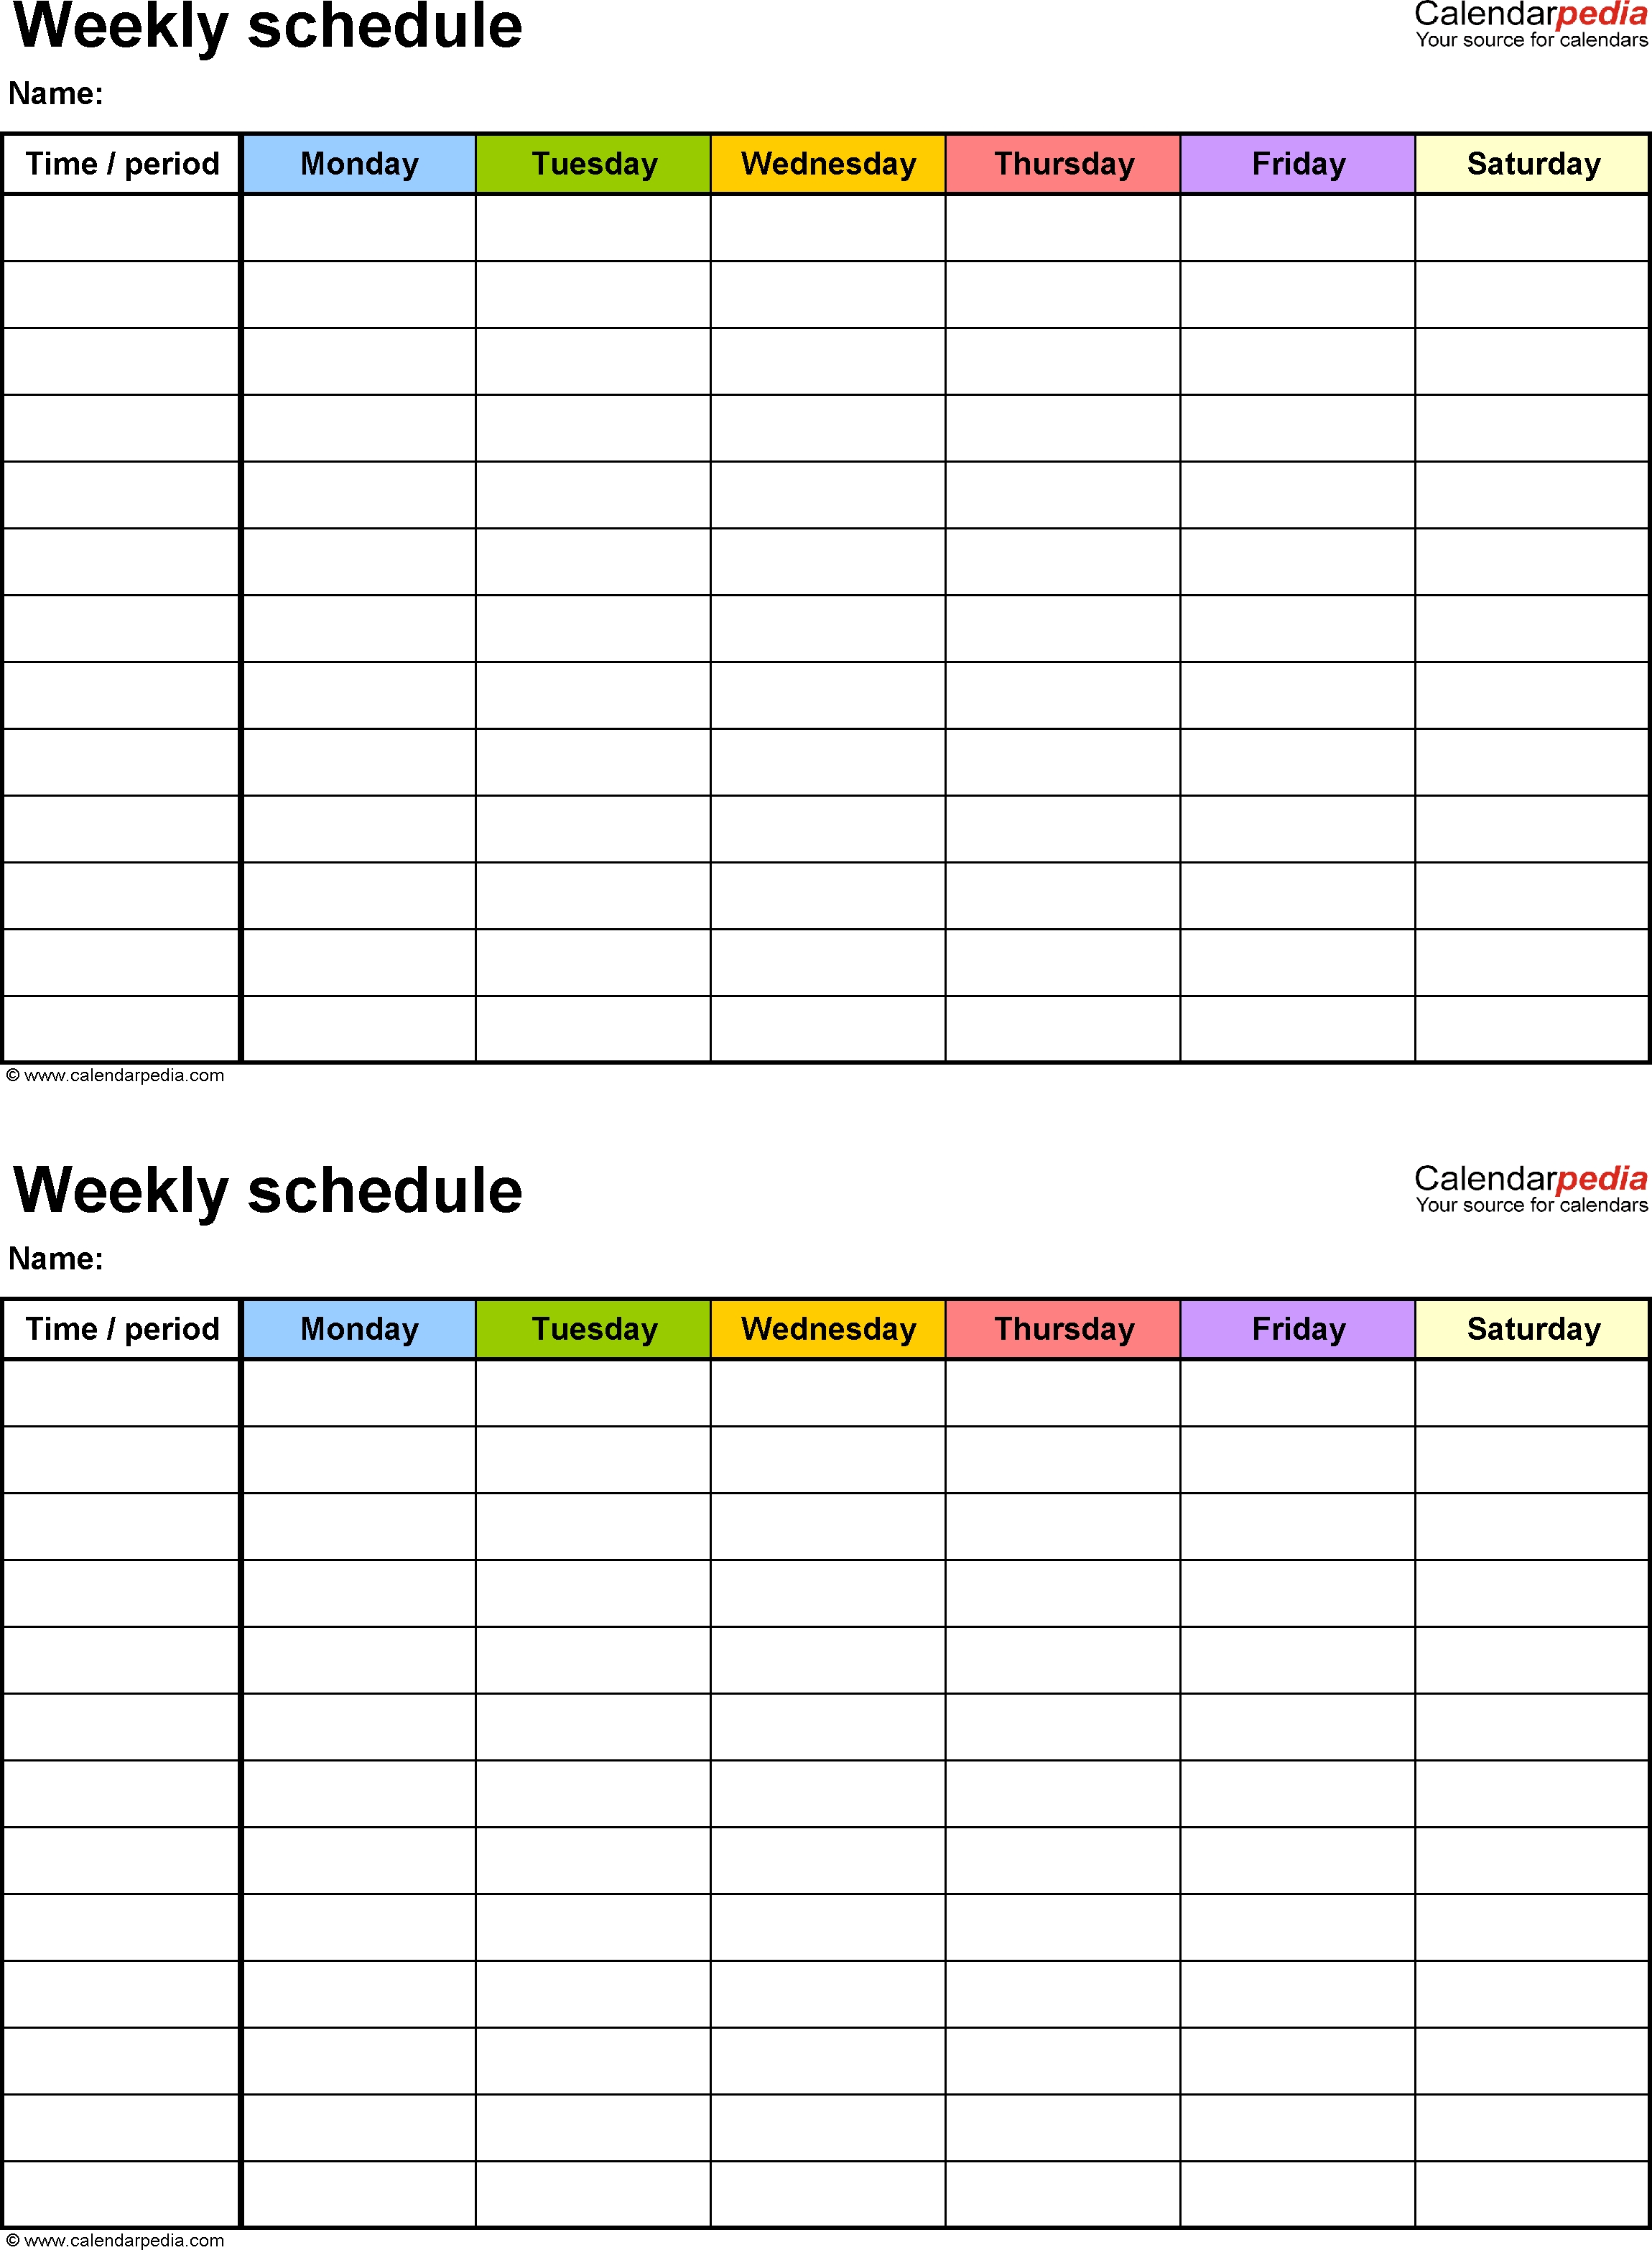 Free Weekly Schedule Templates For Excel - 18 Templates intended for Day By Day Schedule Template